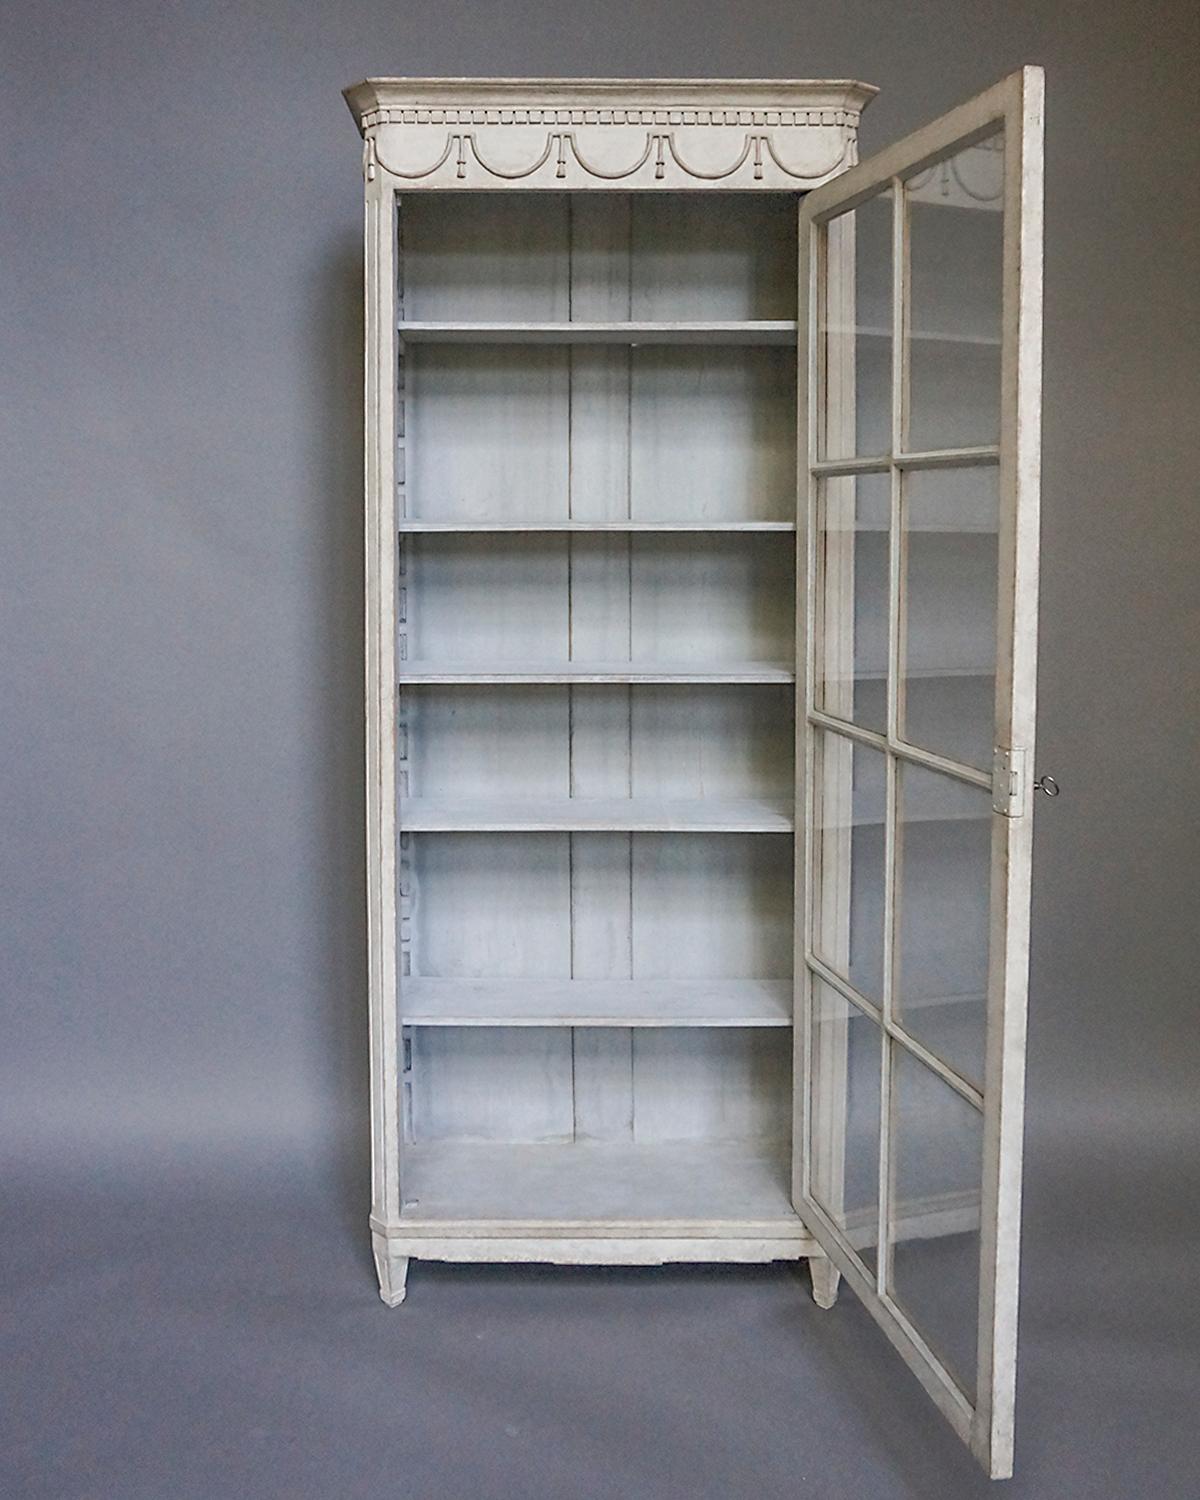 Glass-fronted cabinet or bookcase in the Gustavian style, Sweden circa 1880, with 8 individual panes. Simple molded cornice with dentil detail over a frieze of stylized swags and tassels. Canted corners with reeding over tapering square legs. Inside